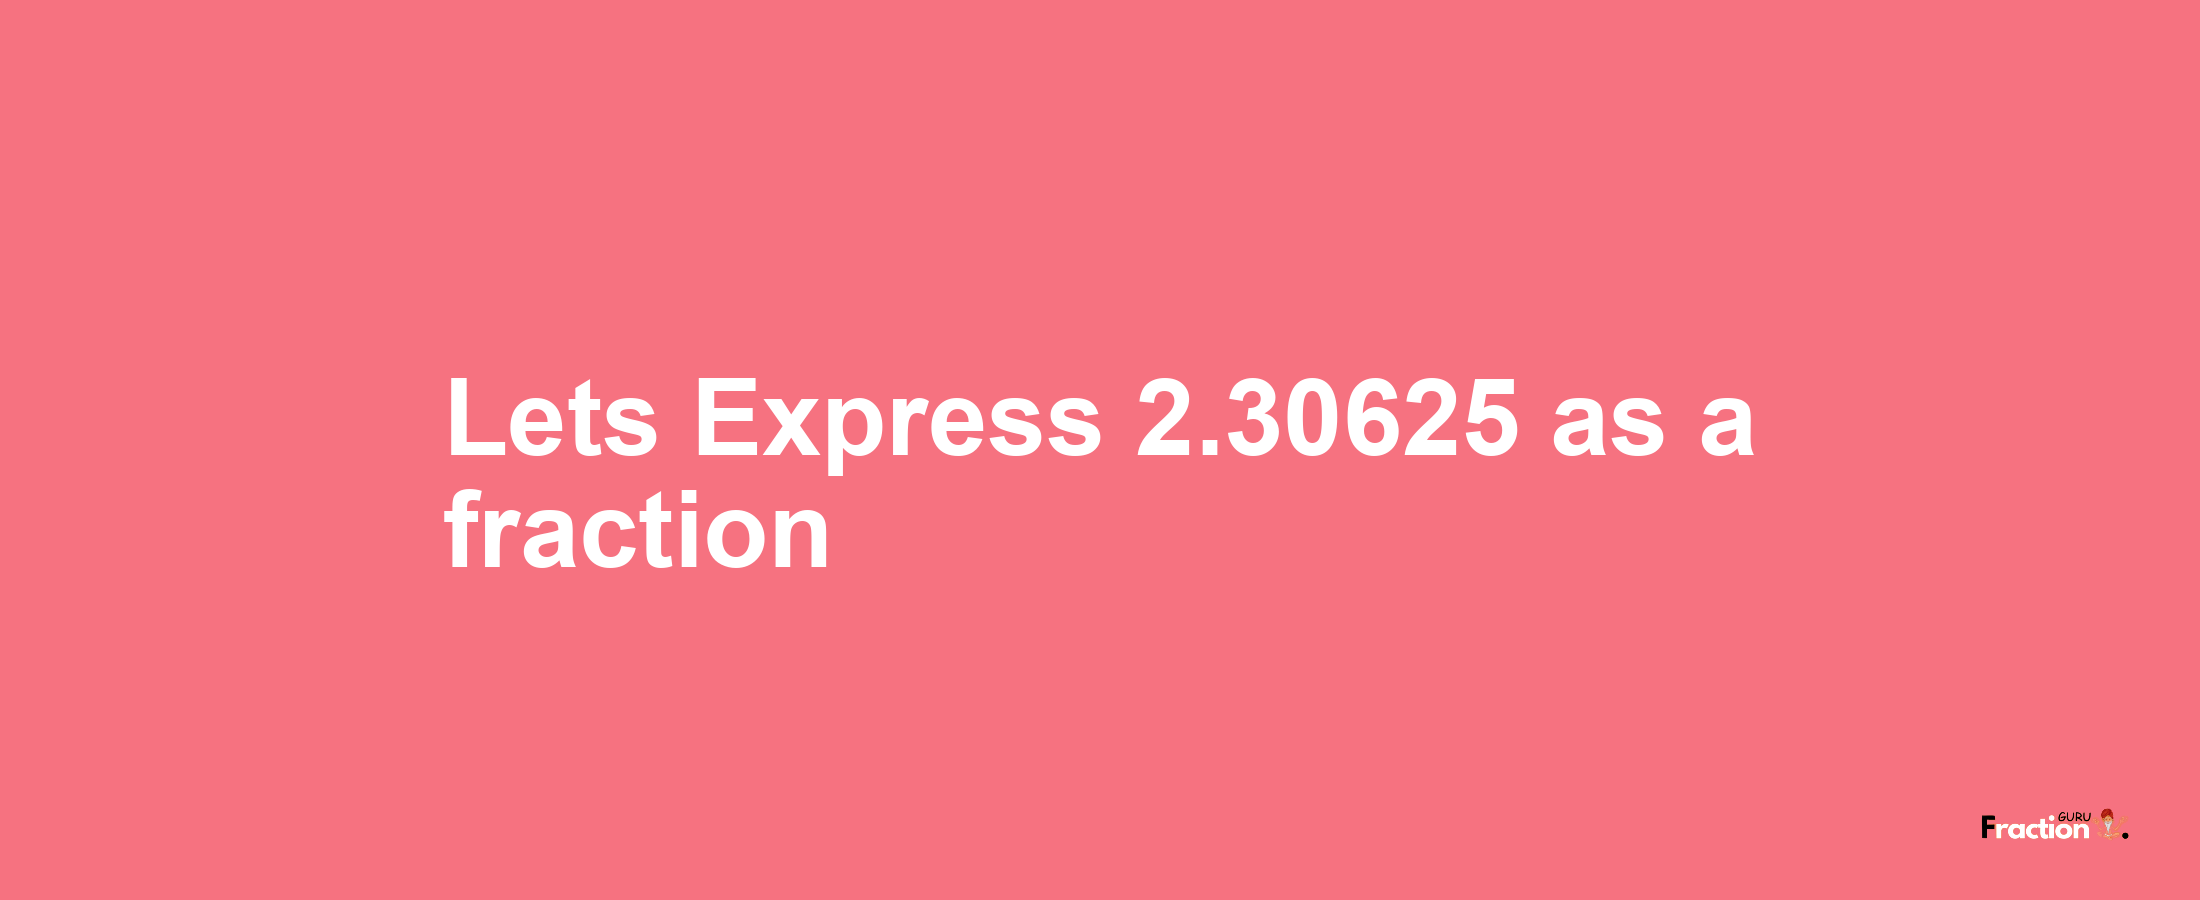 Lets Express 2.30625 as afraction